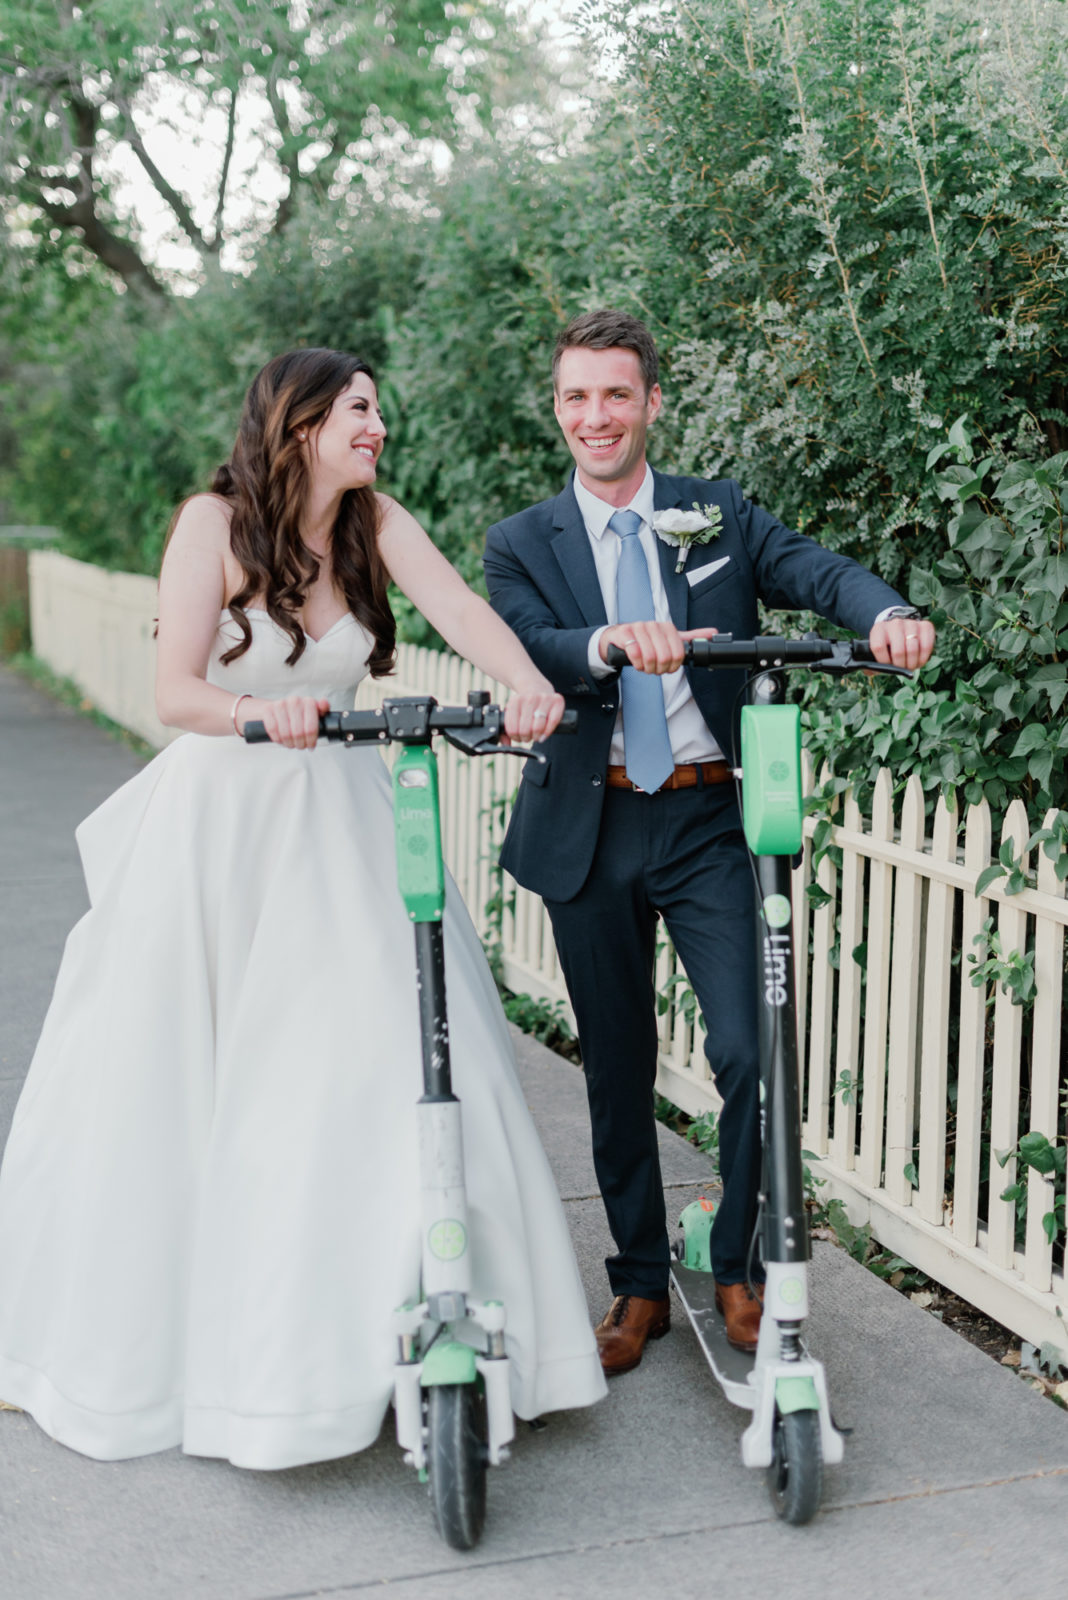 Bride and groom ride electric scooters on their wedding day